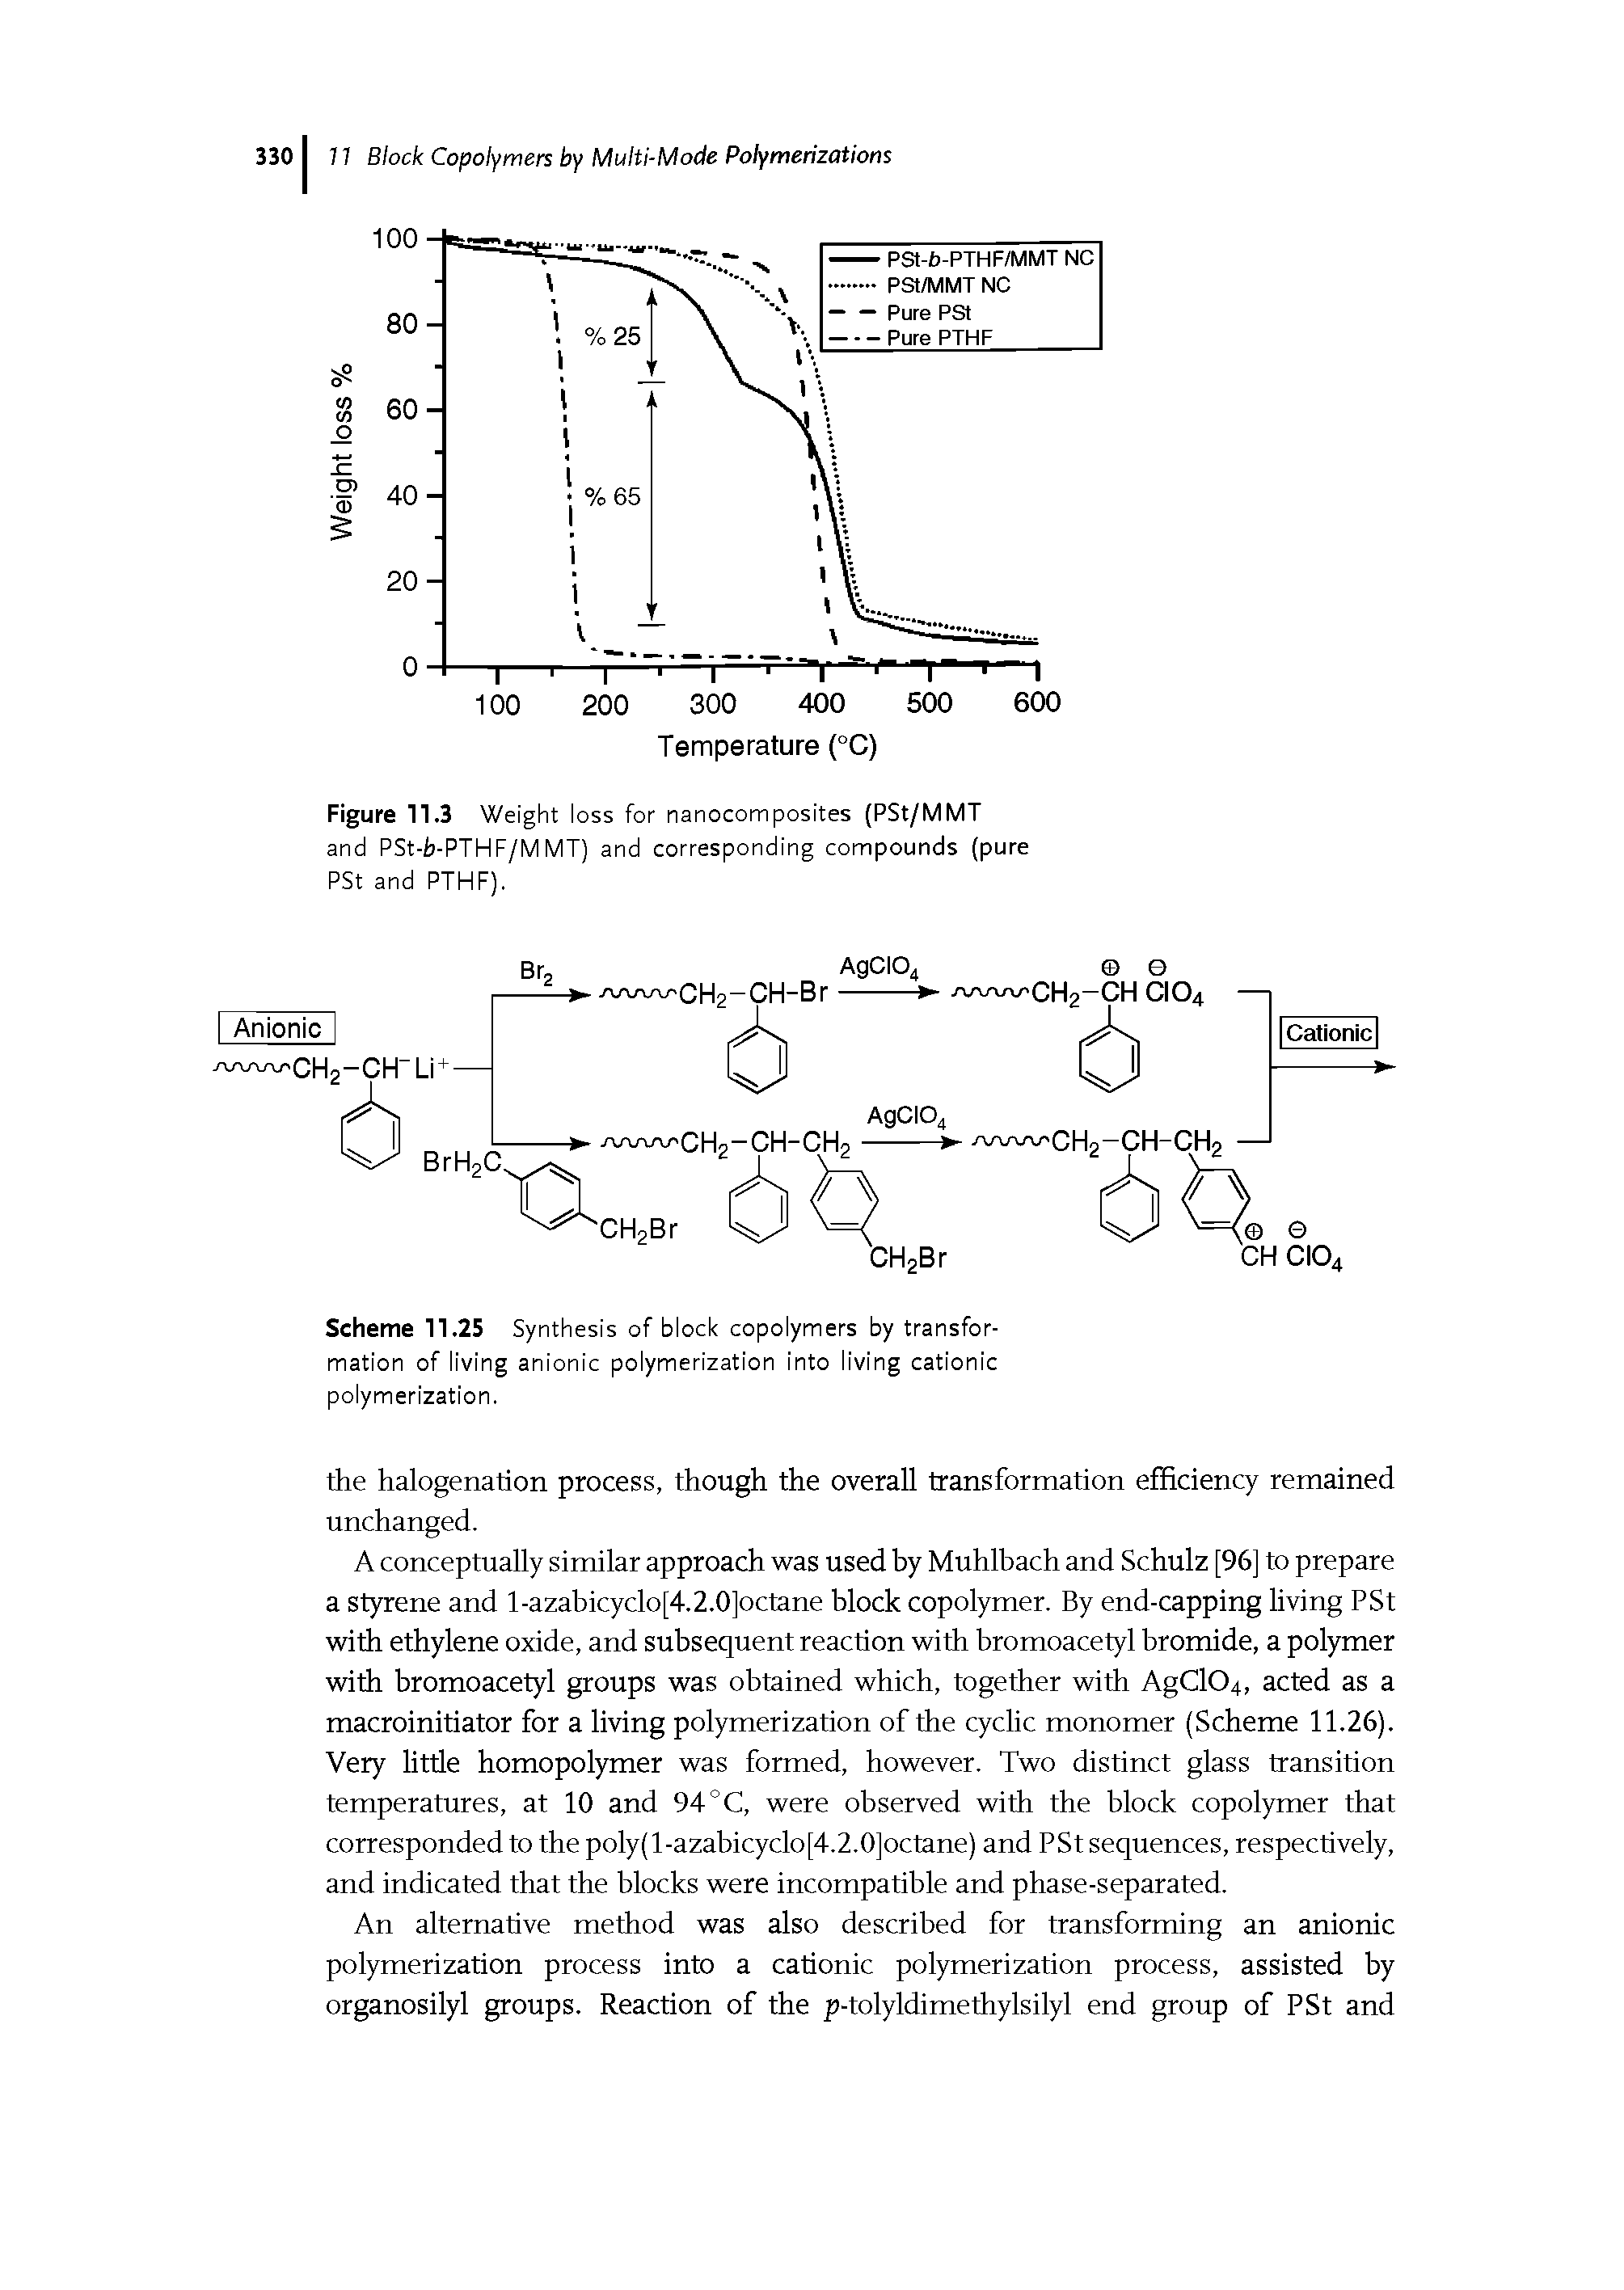 Scheme 11.25 Synthesis of block copolymers by transformation of living anionic polymerization into living cationic polymerization.